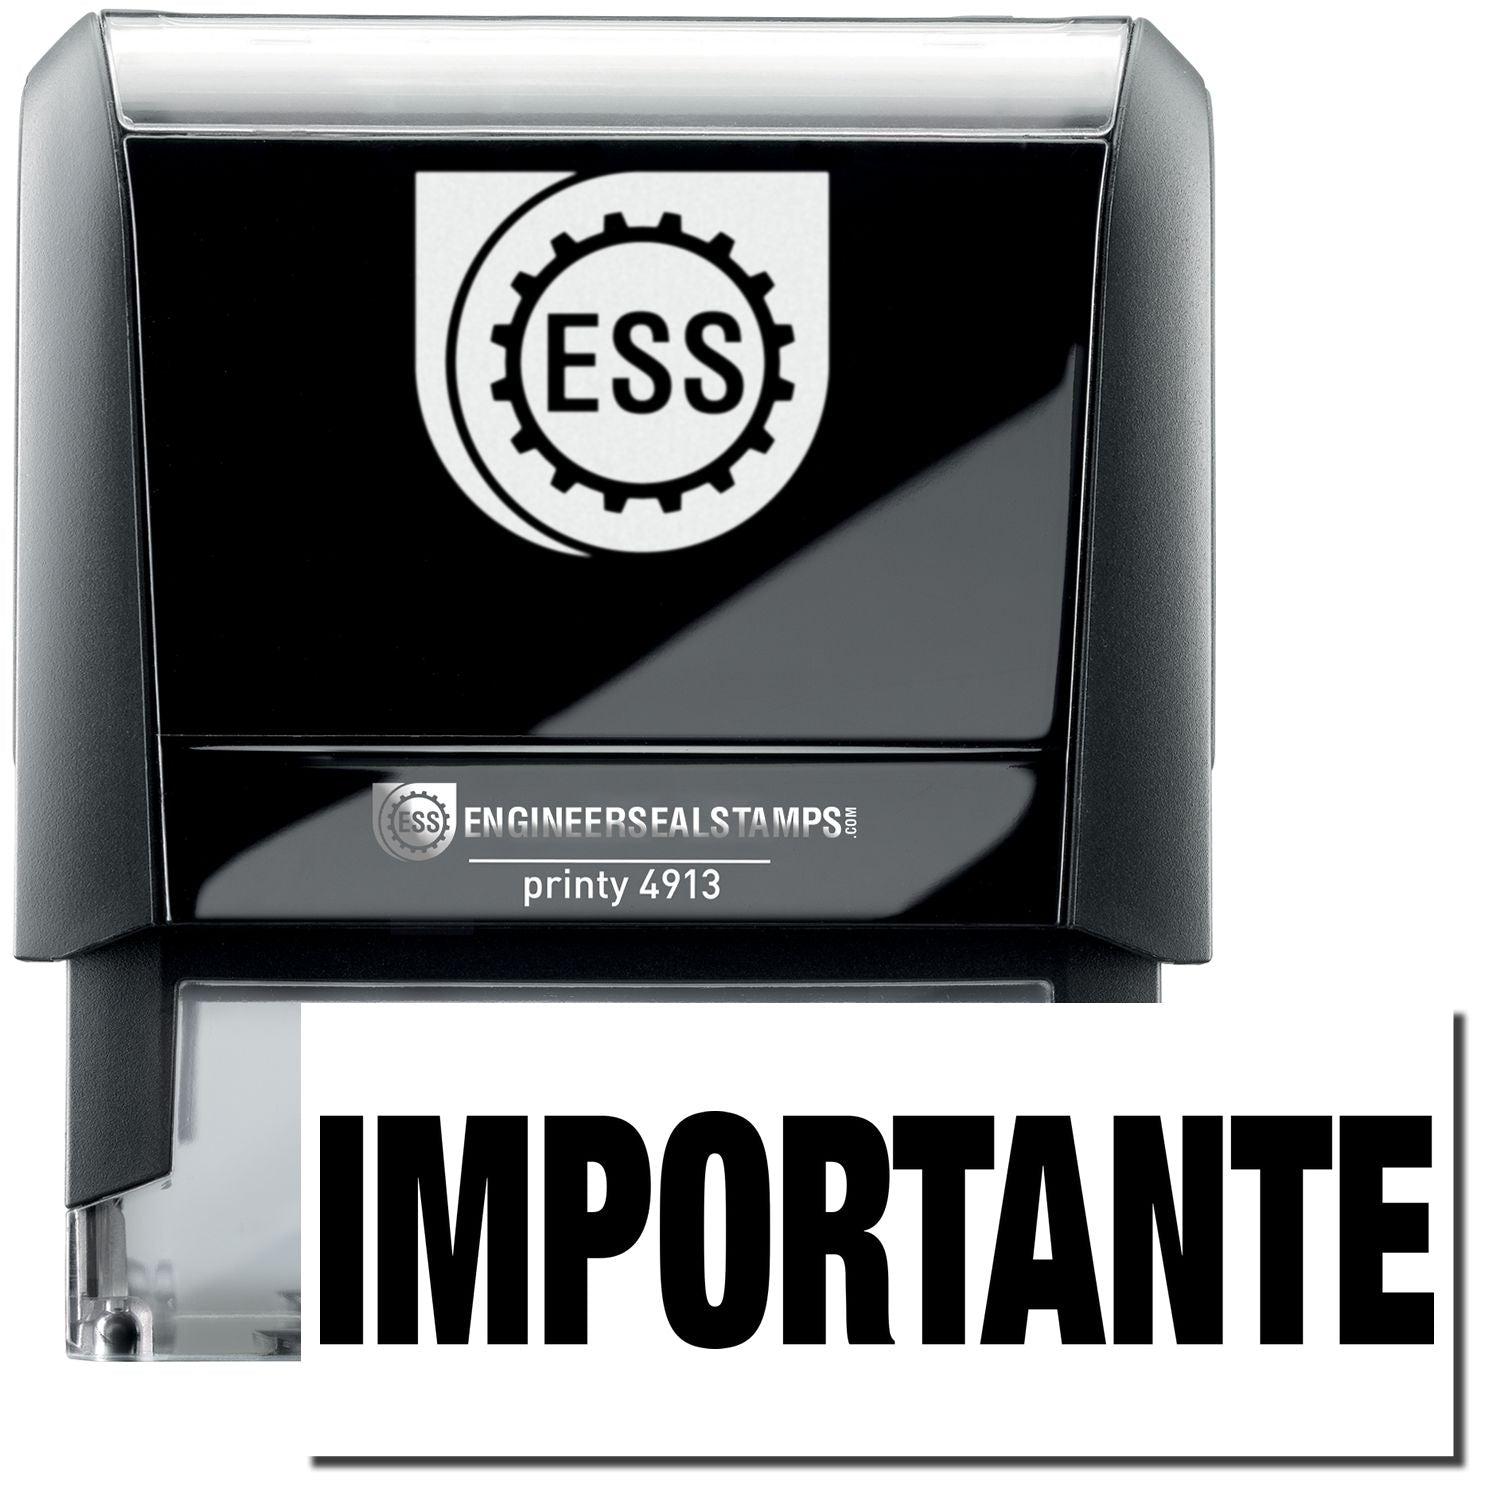 A self-inking stamp with a stamped image showing how the text "IMPORTANTE" in a large font is displayed by it after stamping.